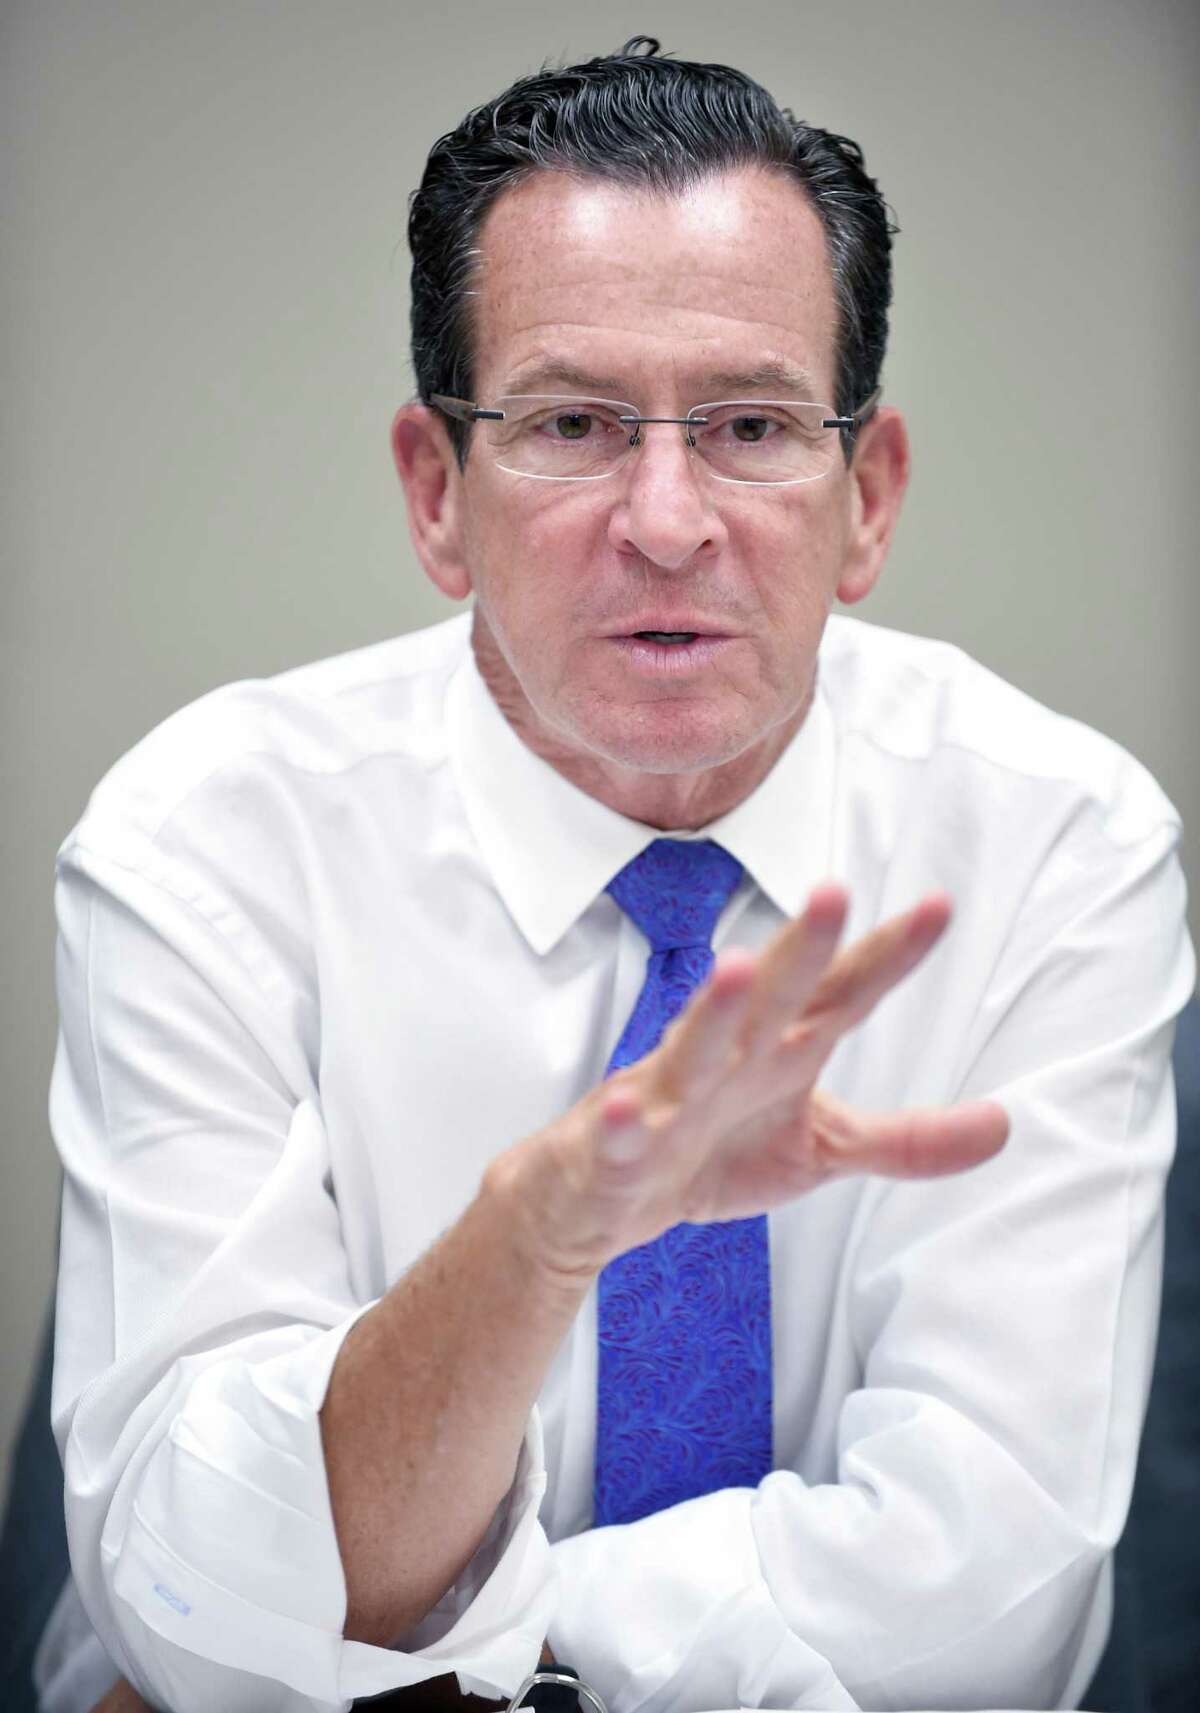 Malloy sits in for a Hearst Connecticut Editorial Board session at the New Haven Register on Thursday, Sept. 7, 2017.